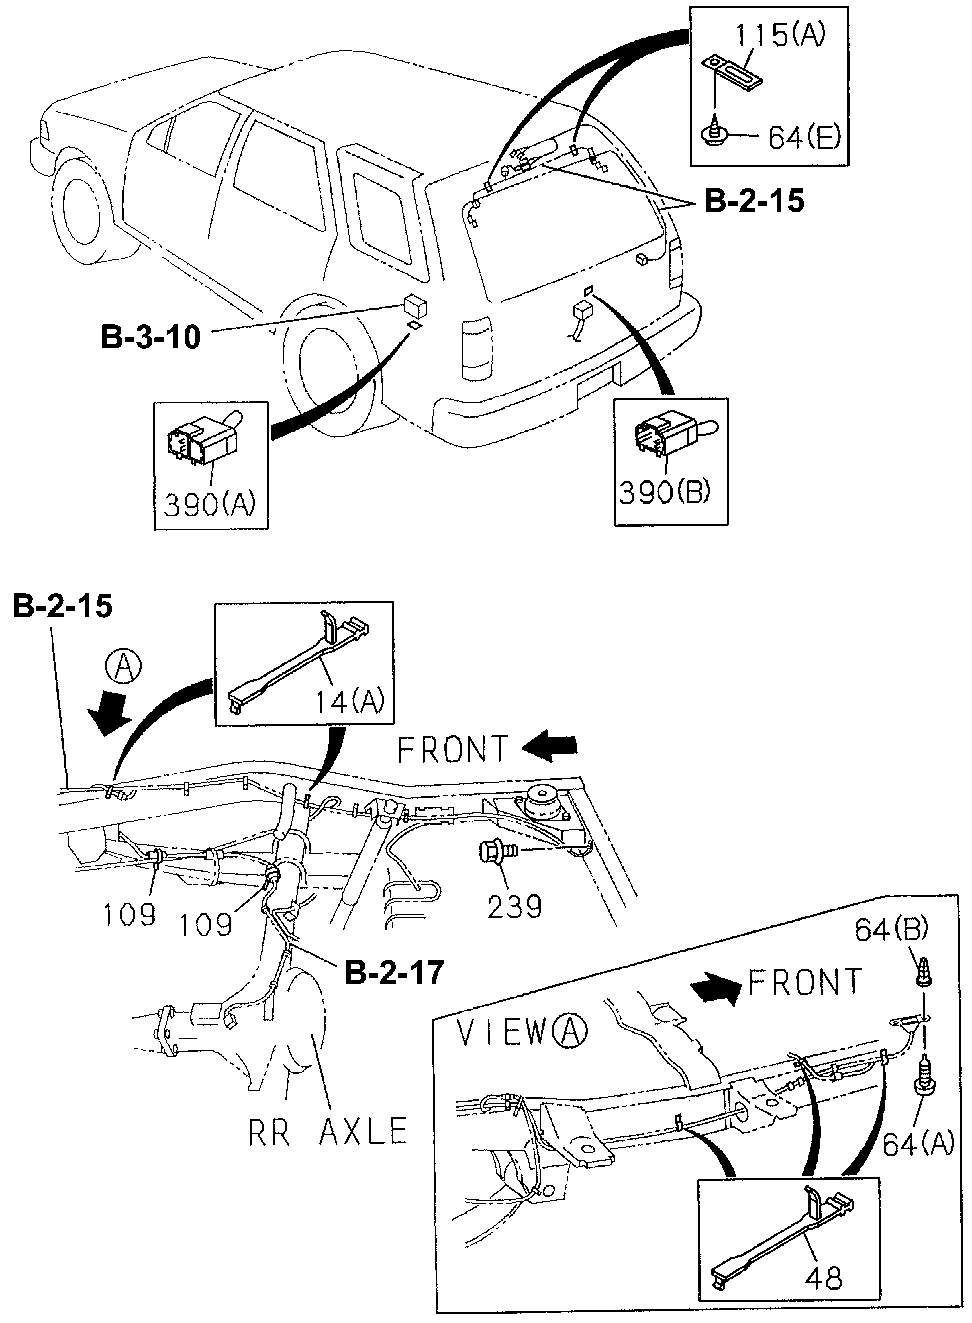 8-97104-874-0 - CONNECTOR, CIRCUIT